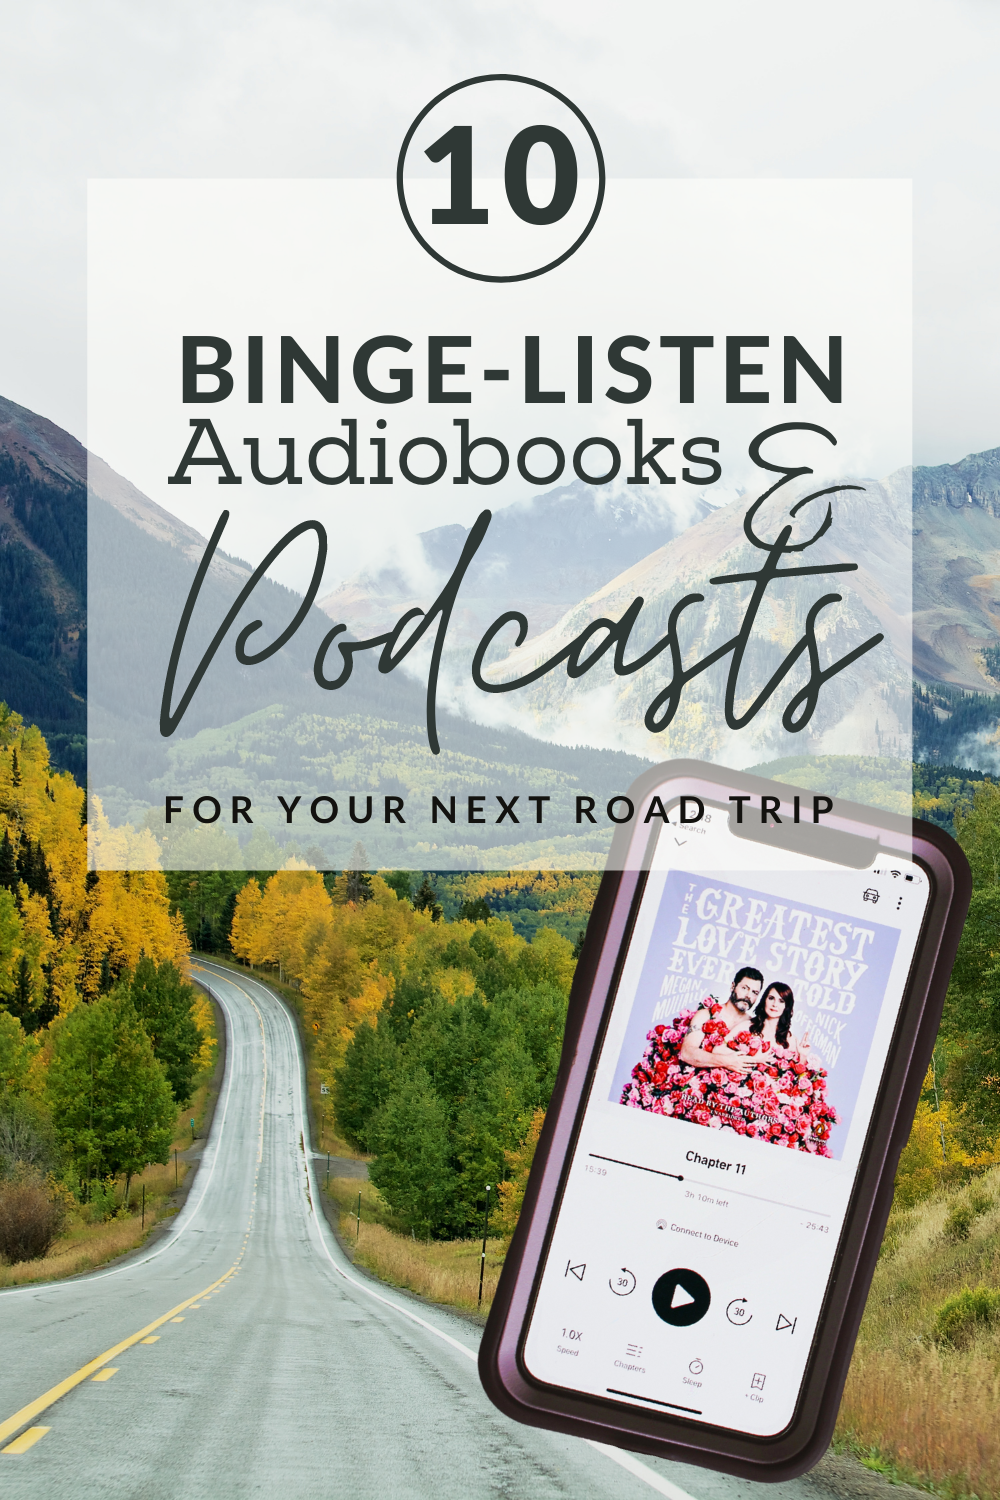 10 Binge-Listen Books & Podcasts for Your Next Road Trip